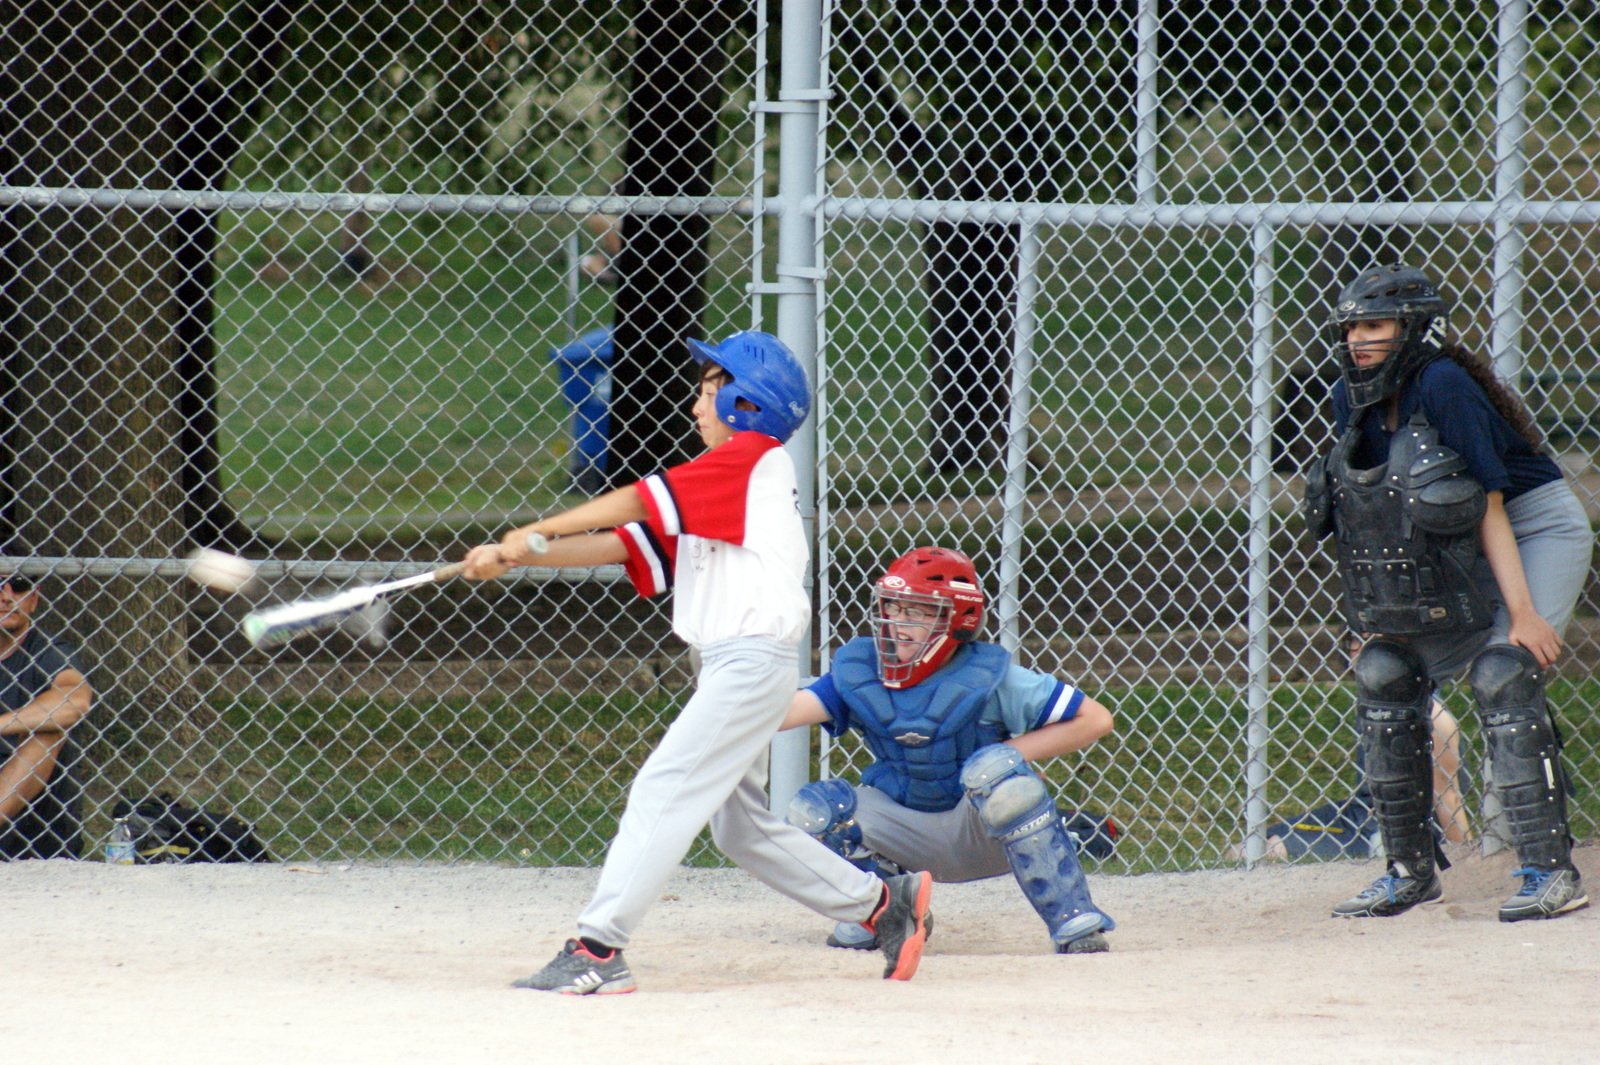 RED SOX POWER > Vincent (4) connects for a 2 RBI double against the Royals in the top of the fourth inning during a Mosquito Division Round Robin Tournament Game at Christie Pits Diamond 3. Vincent powered the Red Sox offense by going 3 for 3 [two doubles, single] at the plate with two runs scored and 4 RBI's. Vincent also pitched a scoreless first inning while striking out two.